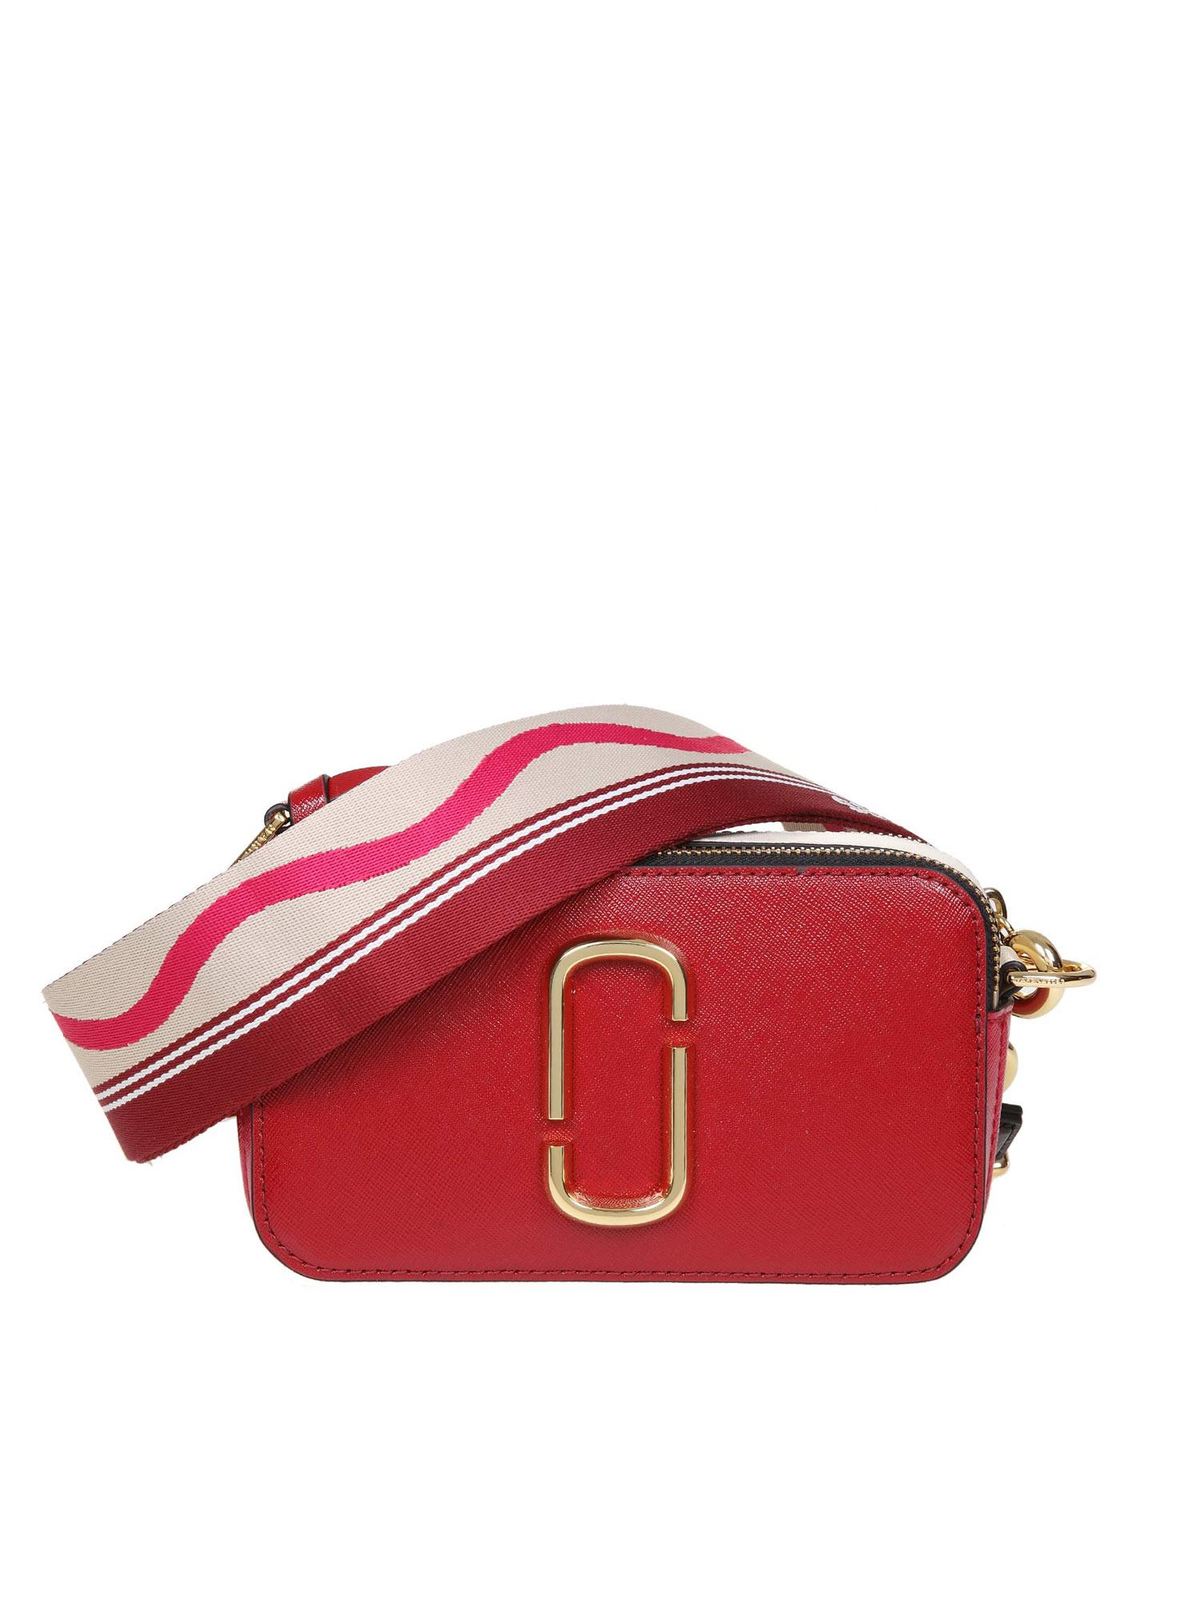 Marc Jacobs The Snapshot New Red Multi Leather Camera Bag